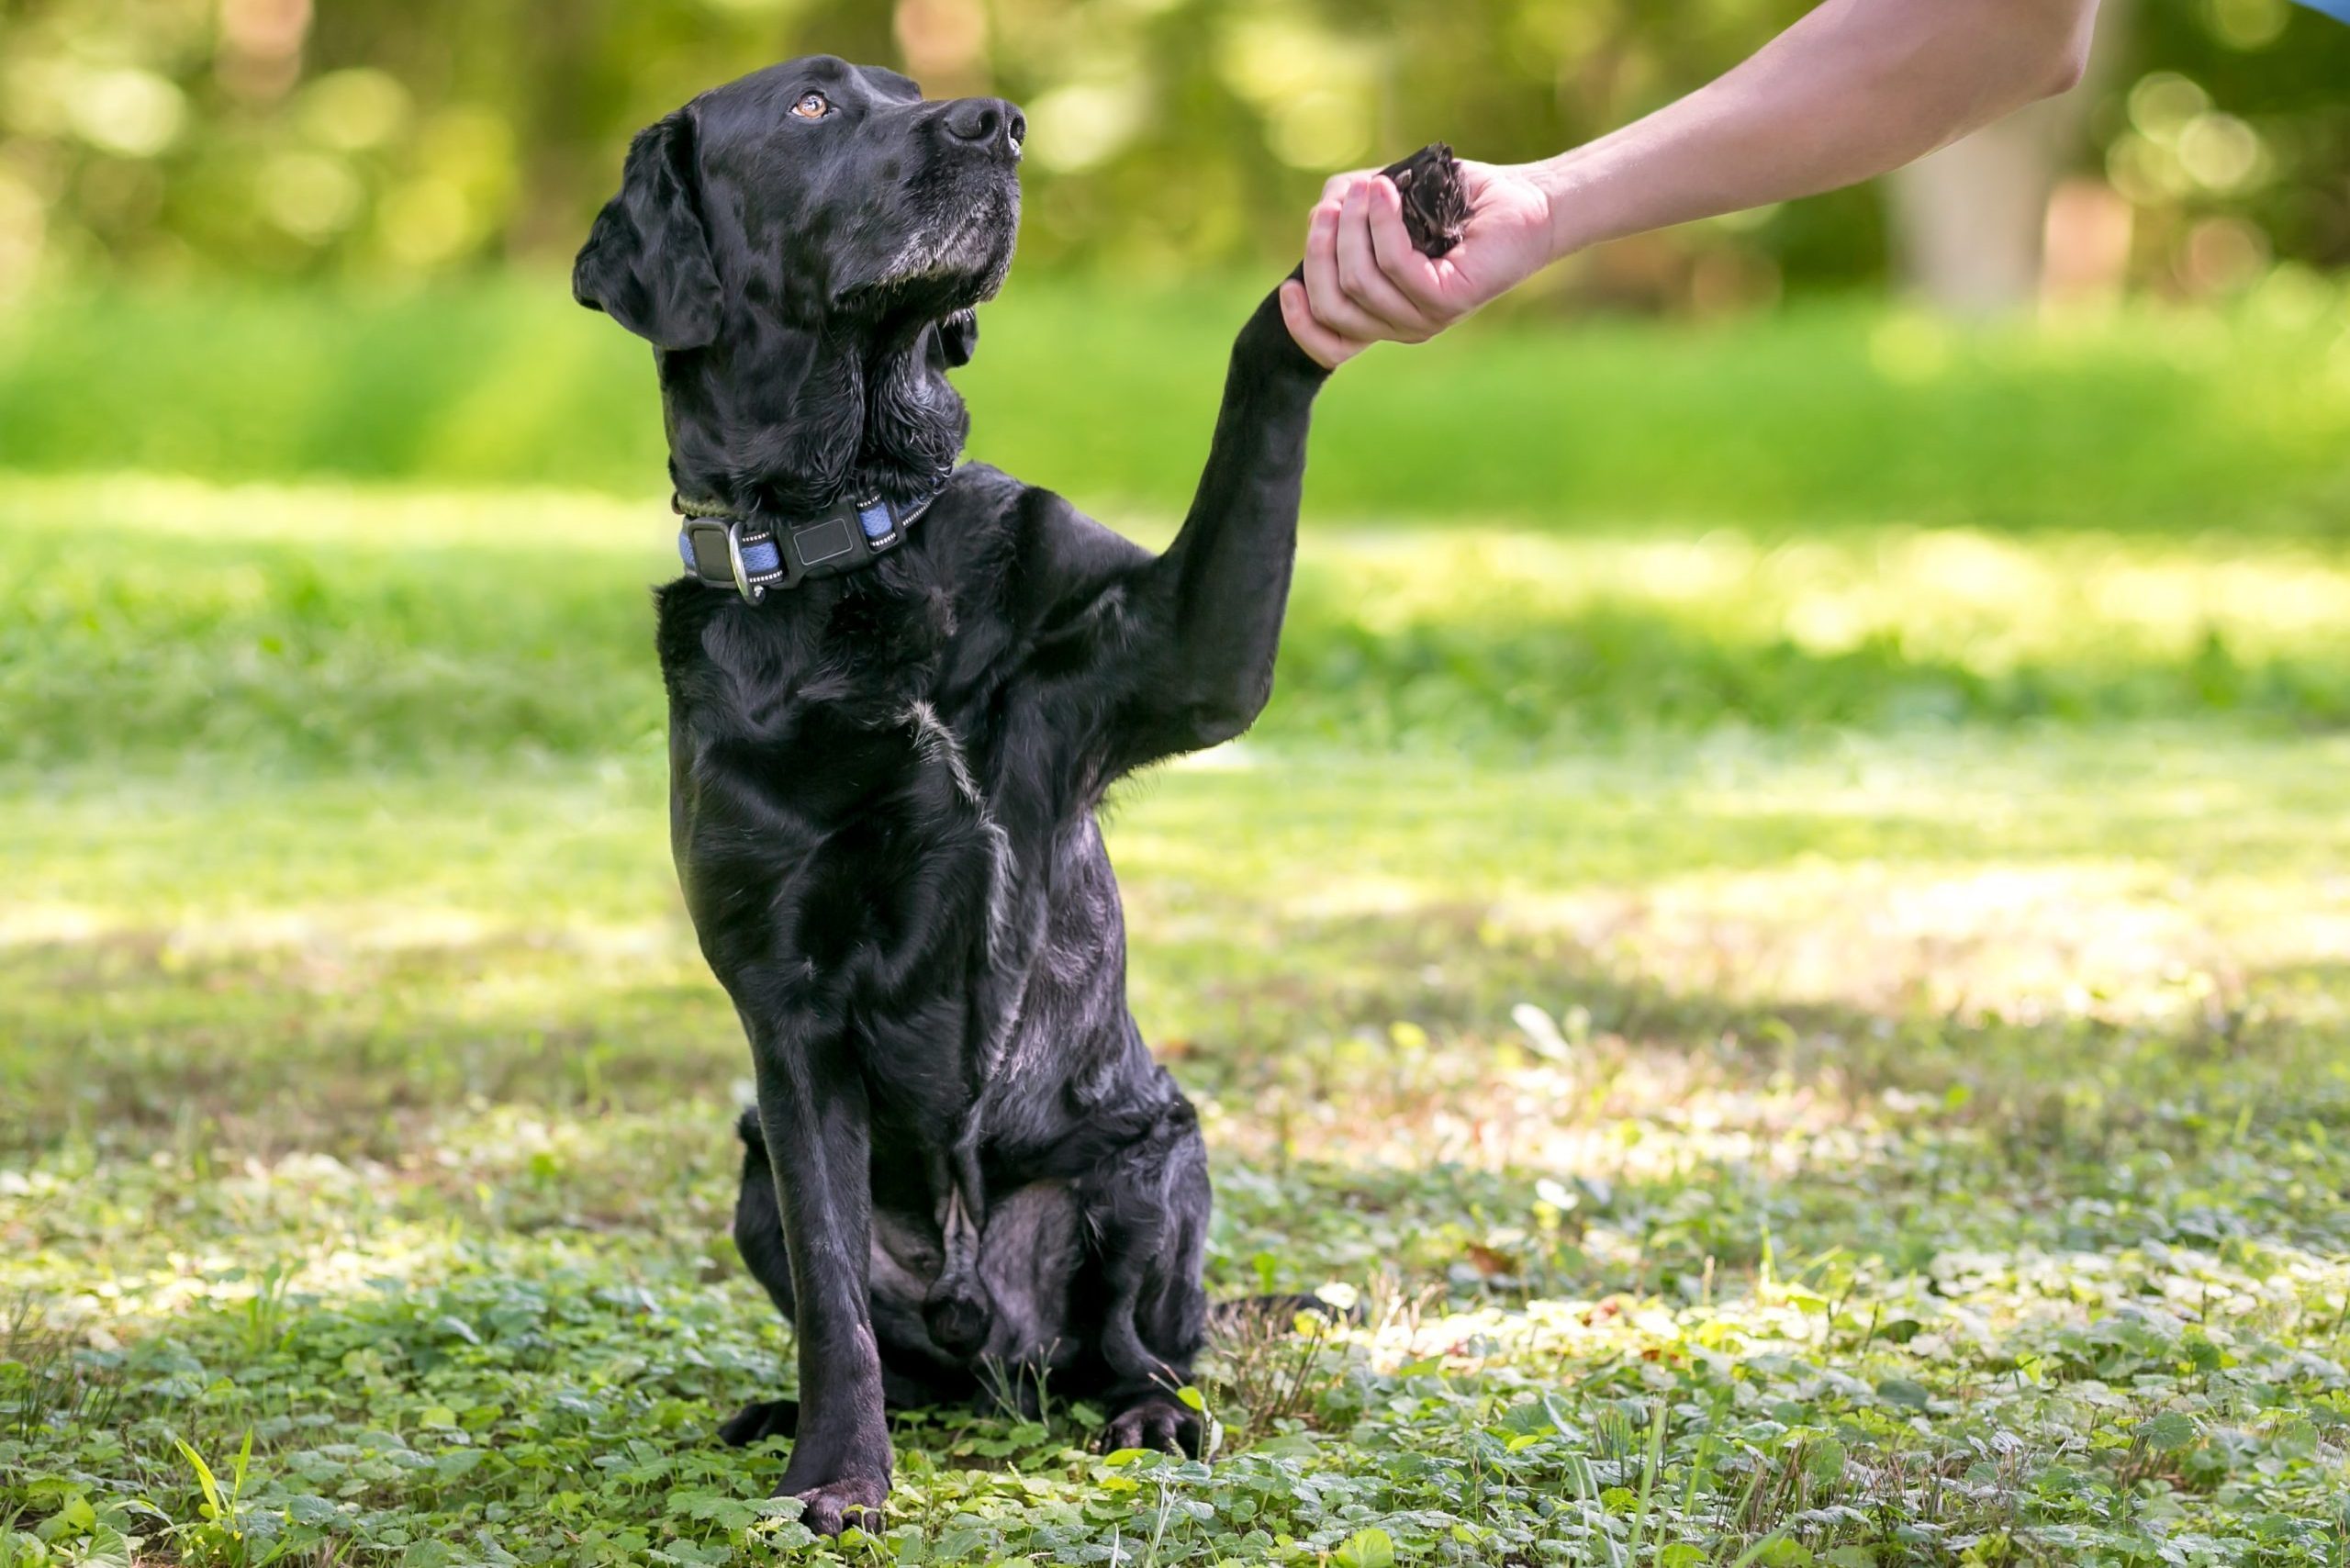 Brain Training For Dogs - Unique Dog Training Course